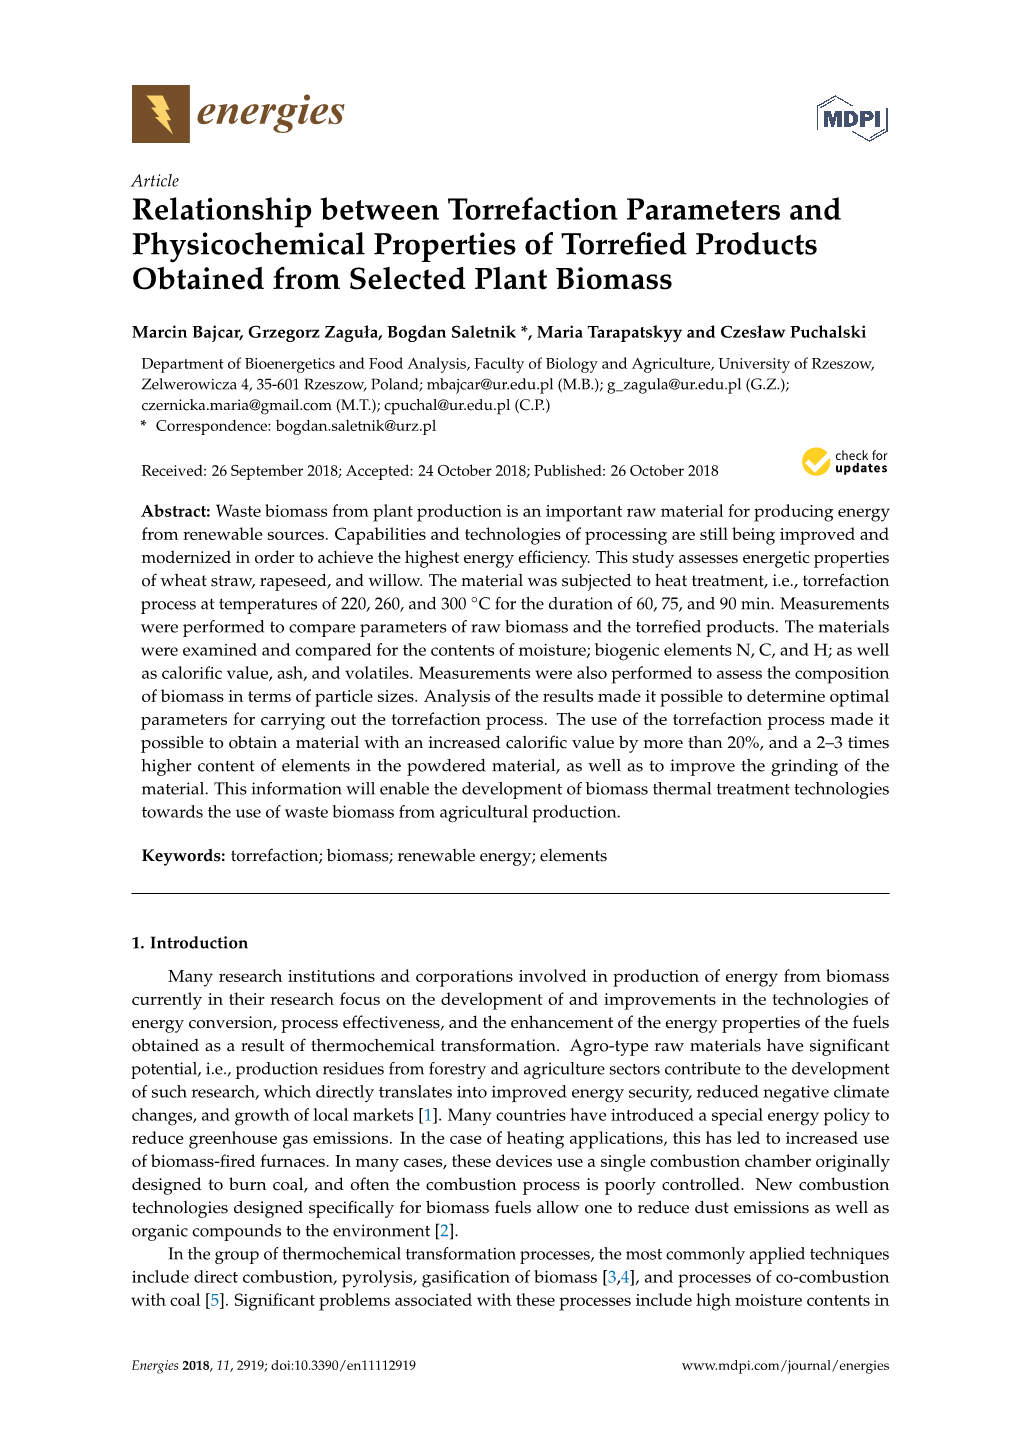 Relationship Between Torrefaction Parameters and Physicochemical Properties of Torreﬁed Products Obtained from Selected Plant Biomass